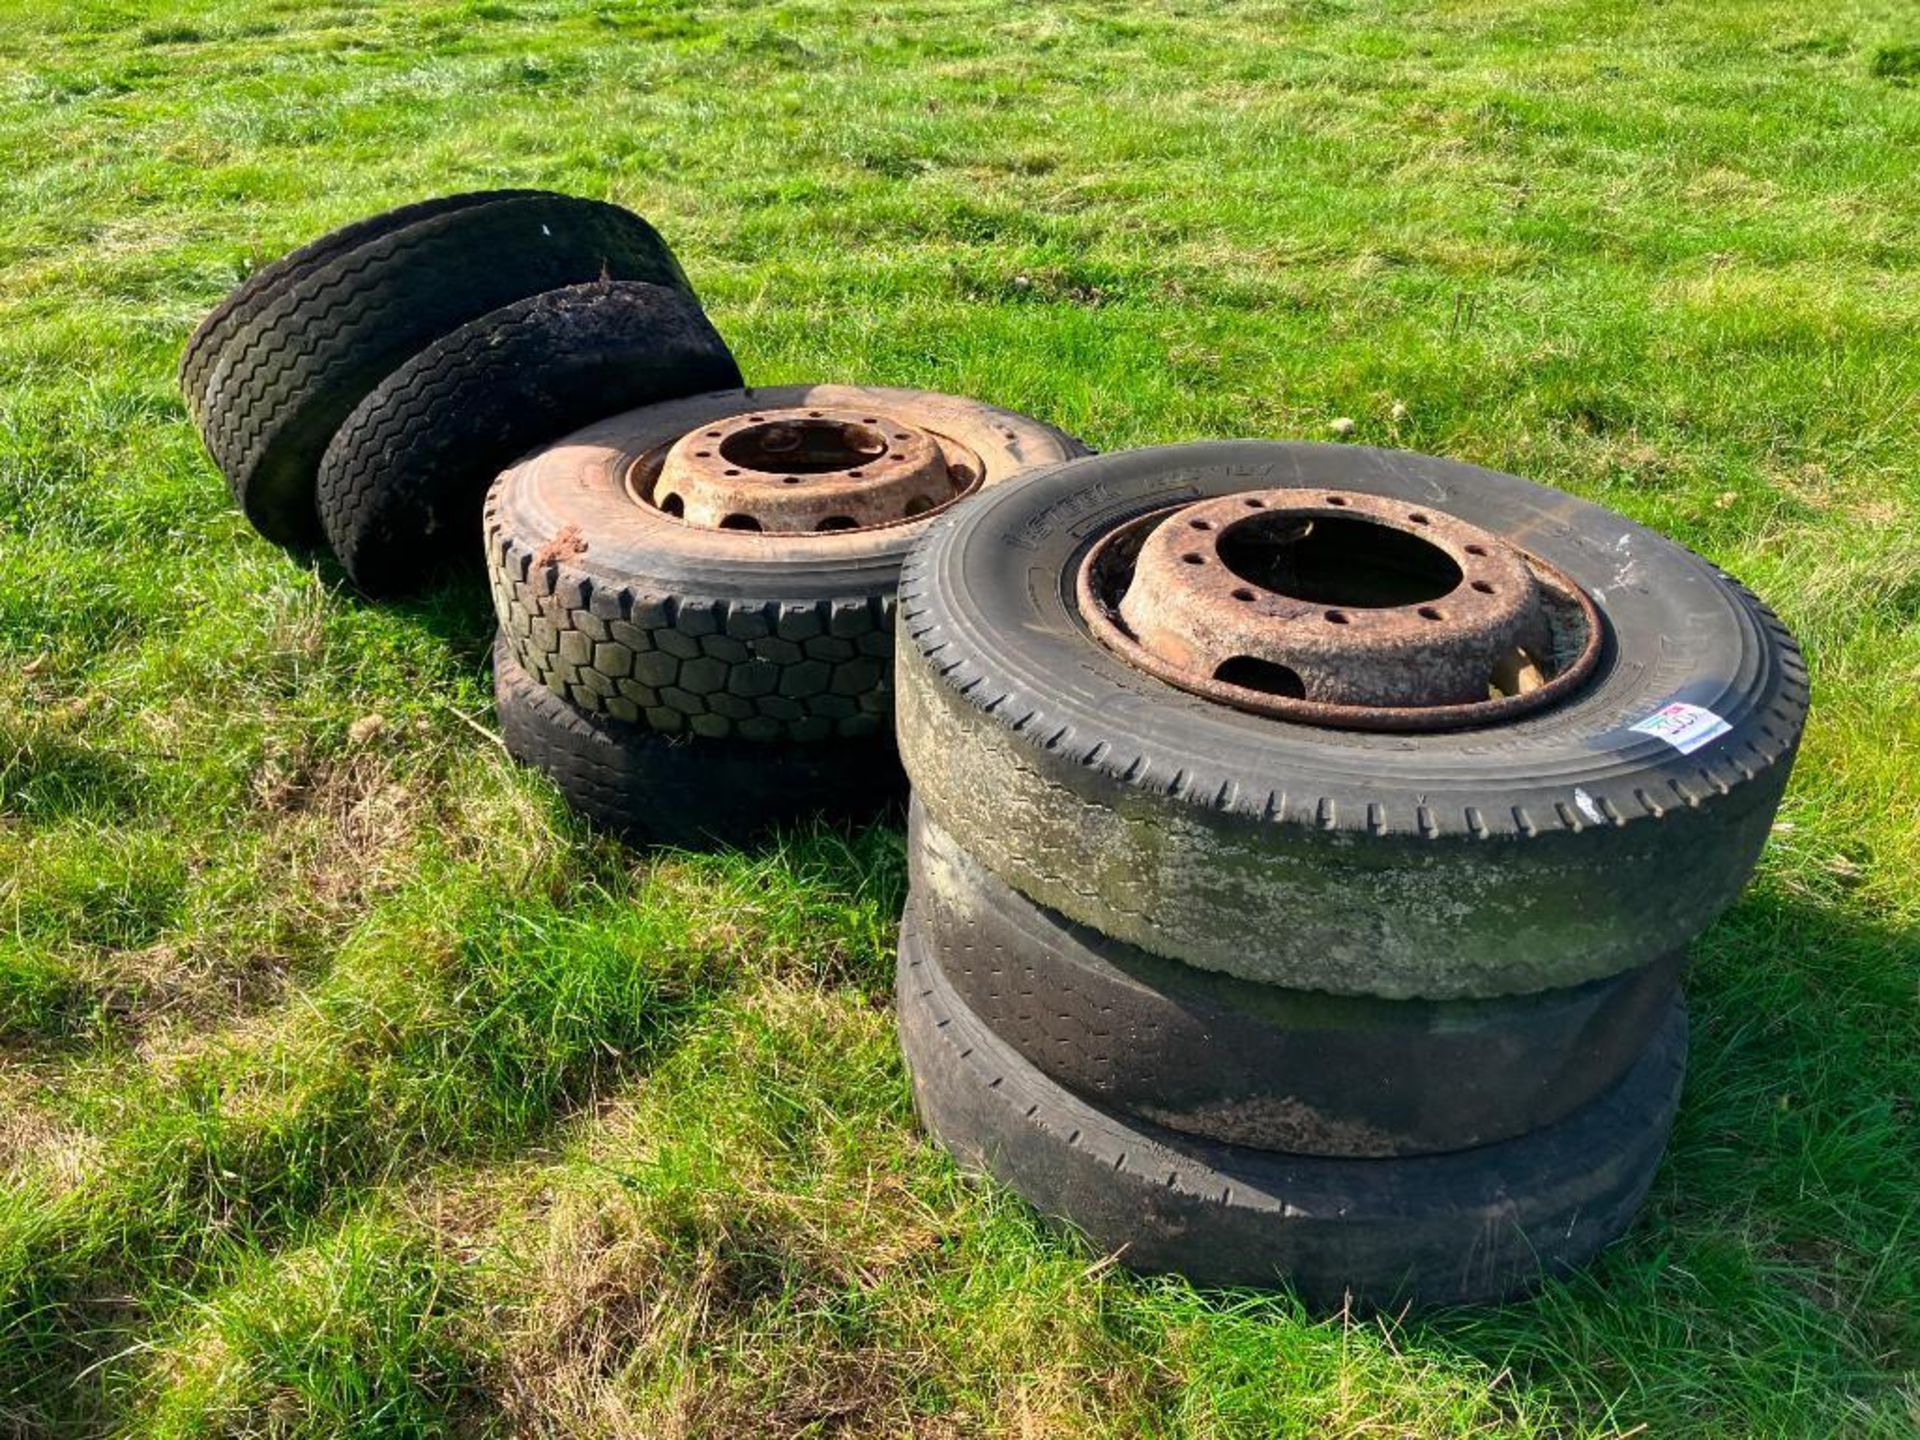 Quantity miscellaneous wheels and tyres